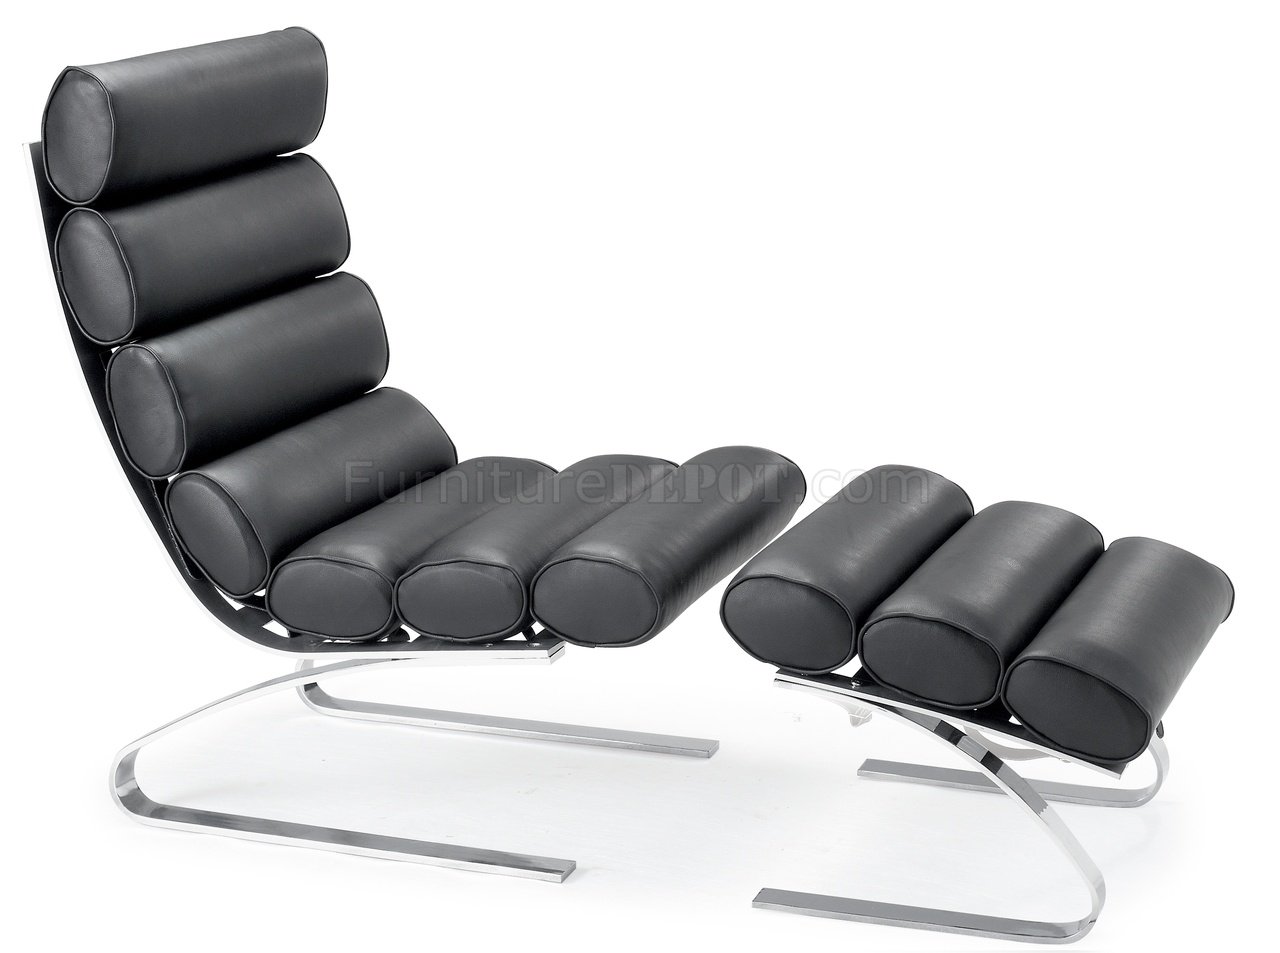 Black Leatherette Chaise w/Bolster Cushions & Steel Chrome Base - Click Image to Close